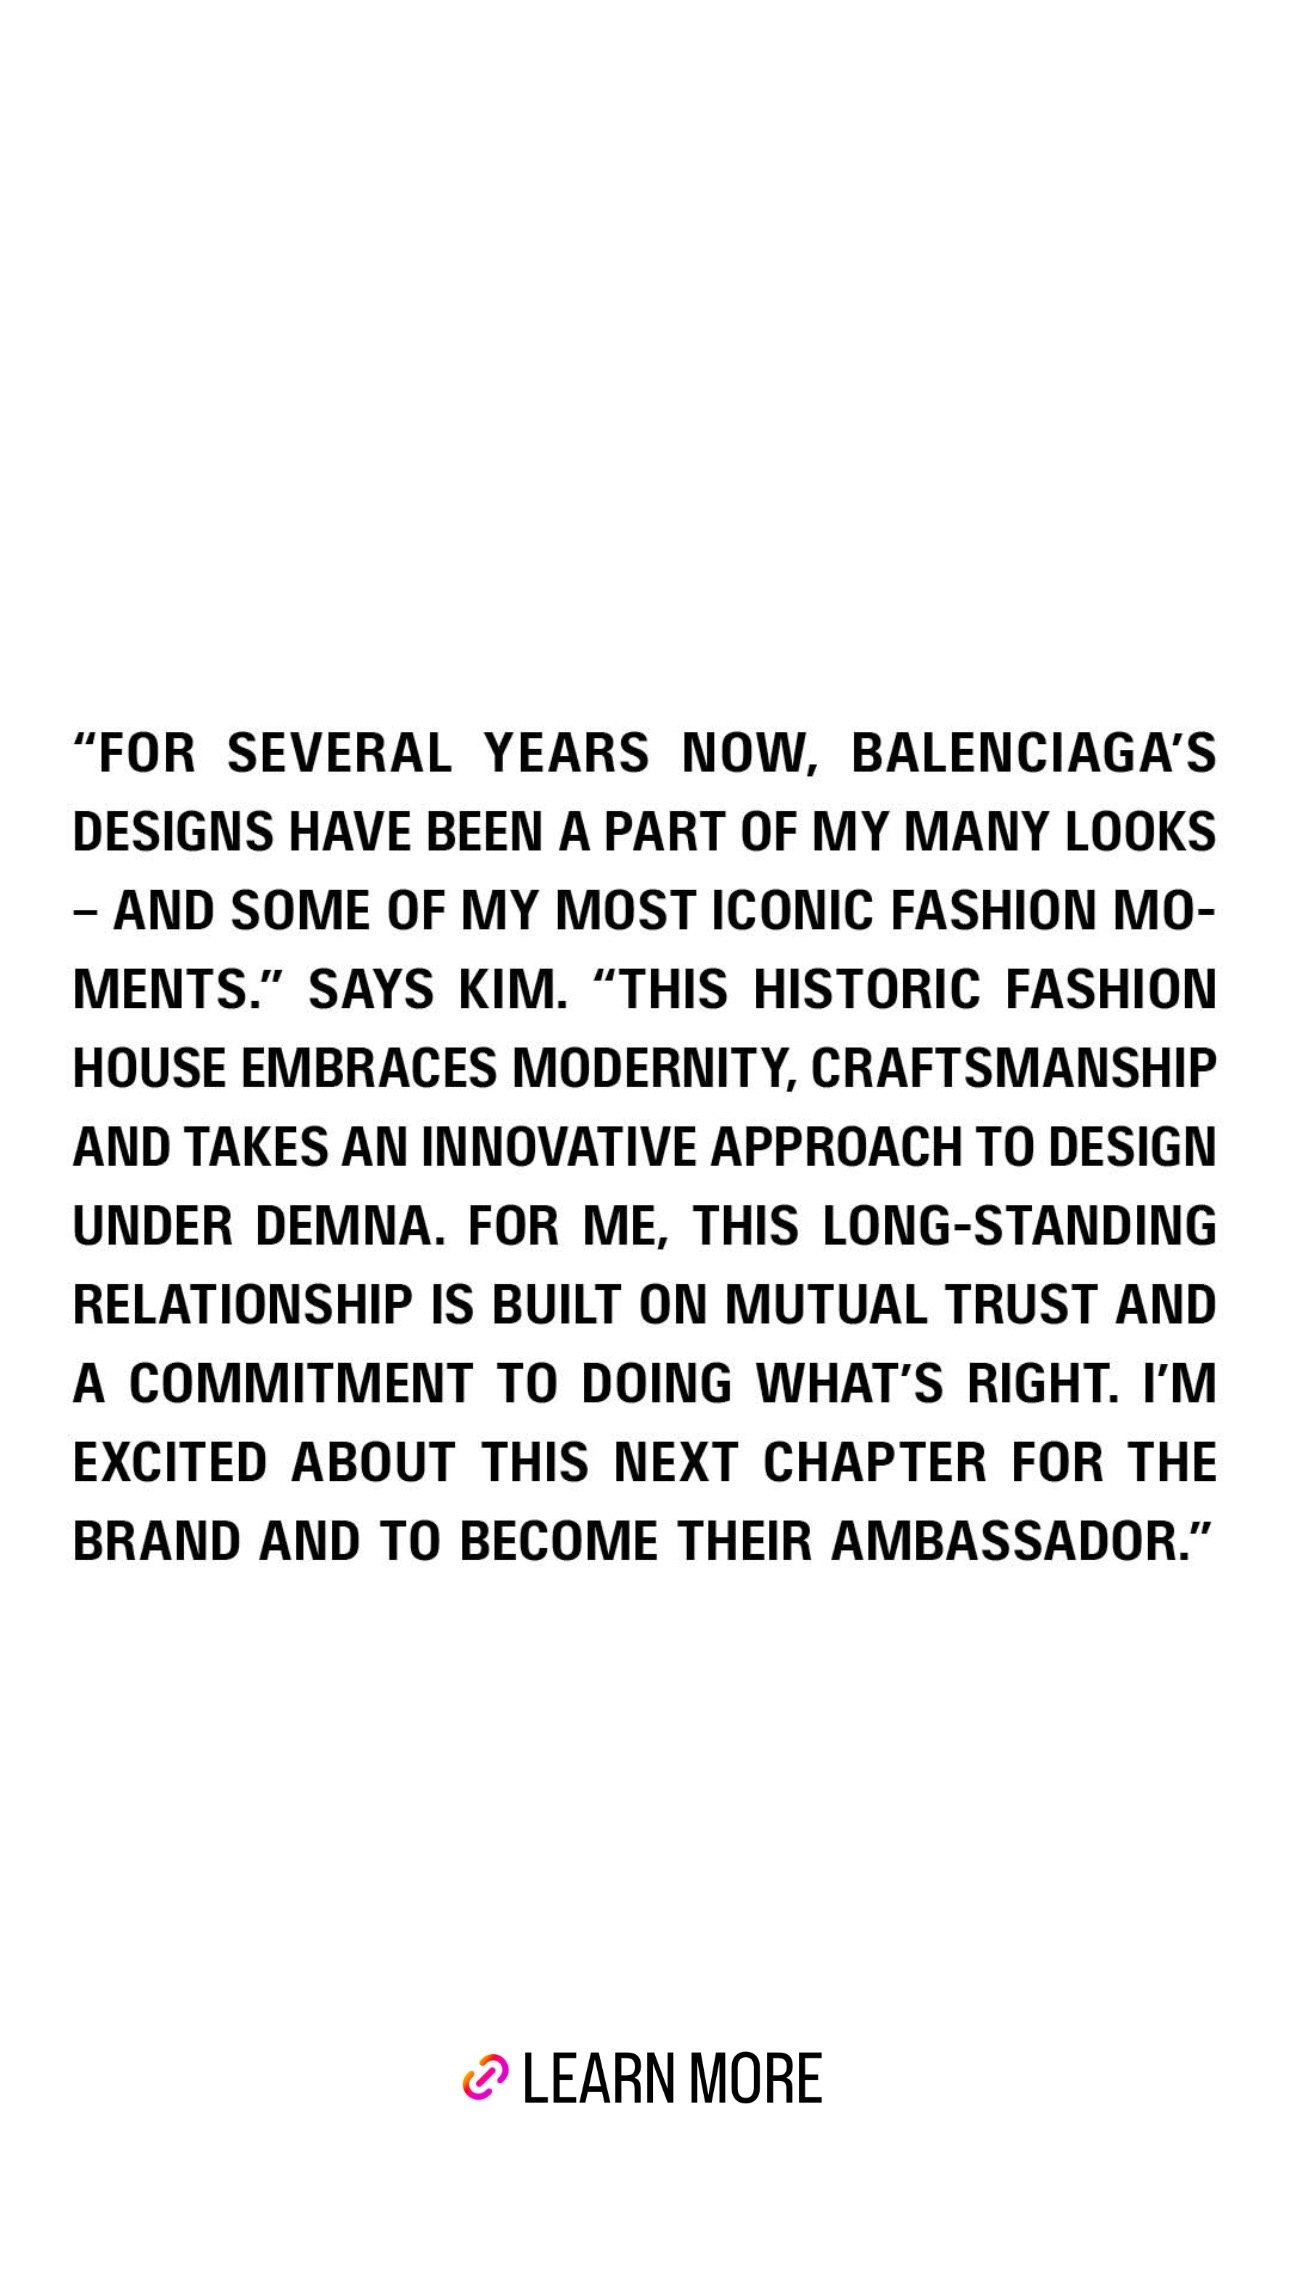 However, Kim announced that she was a new brand ambassador for Balenciaga last month